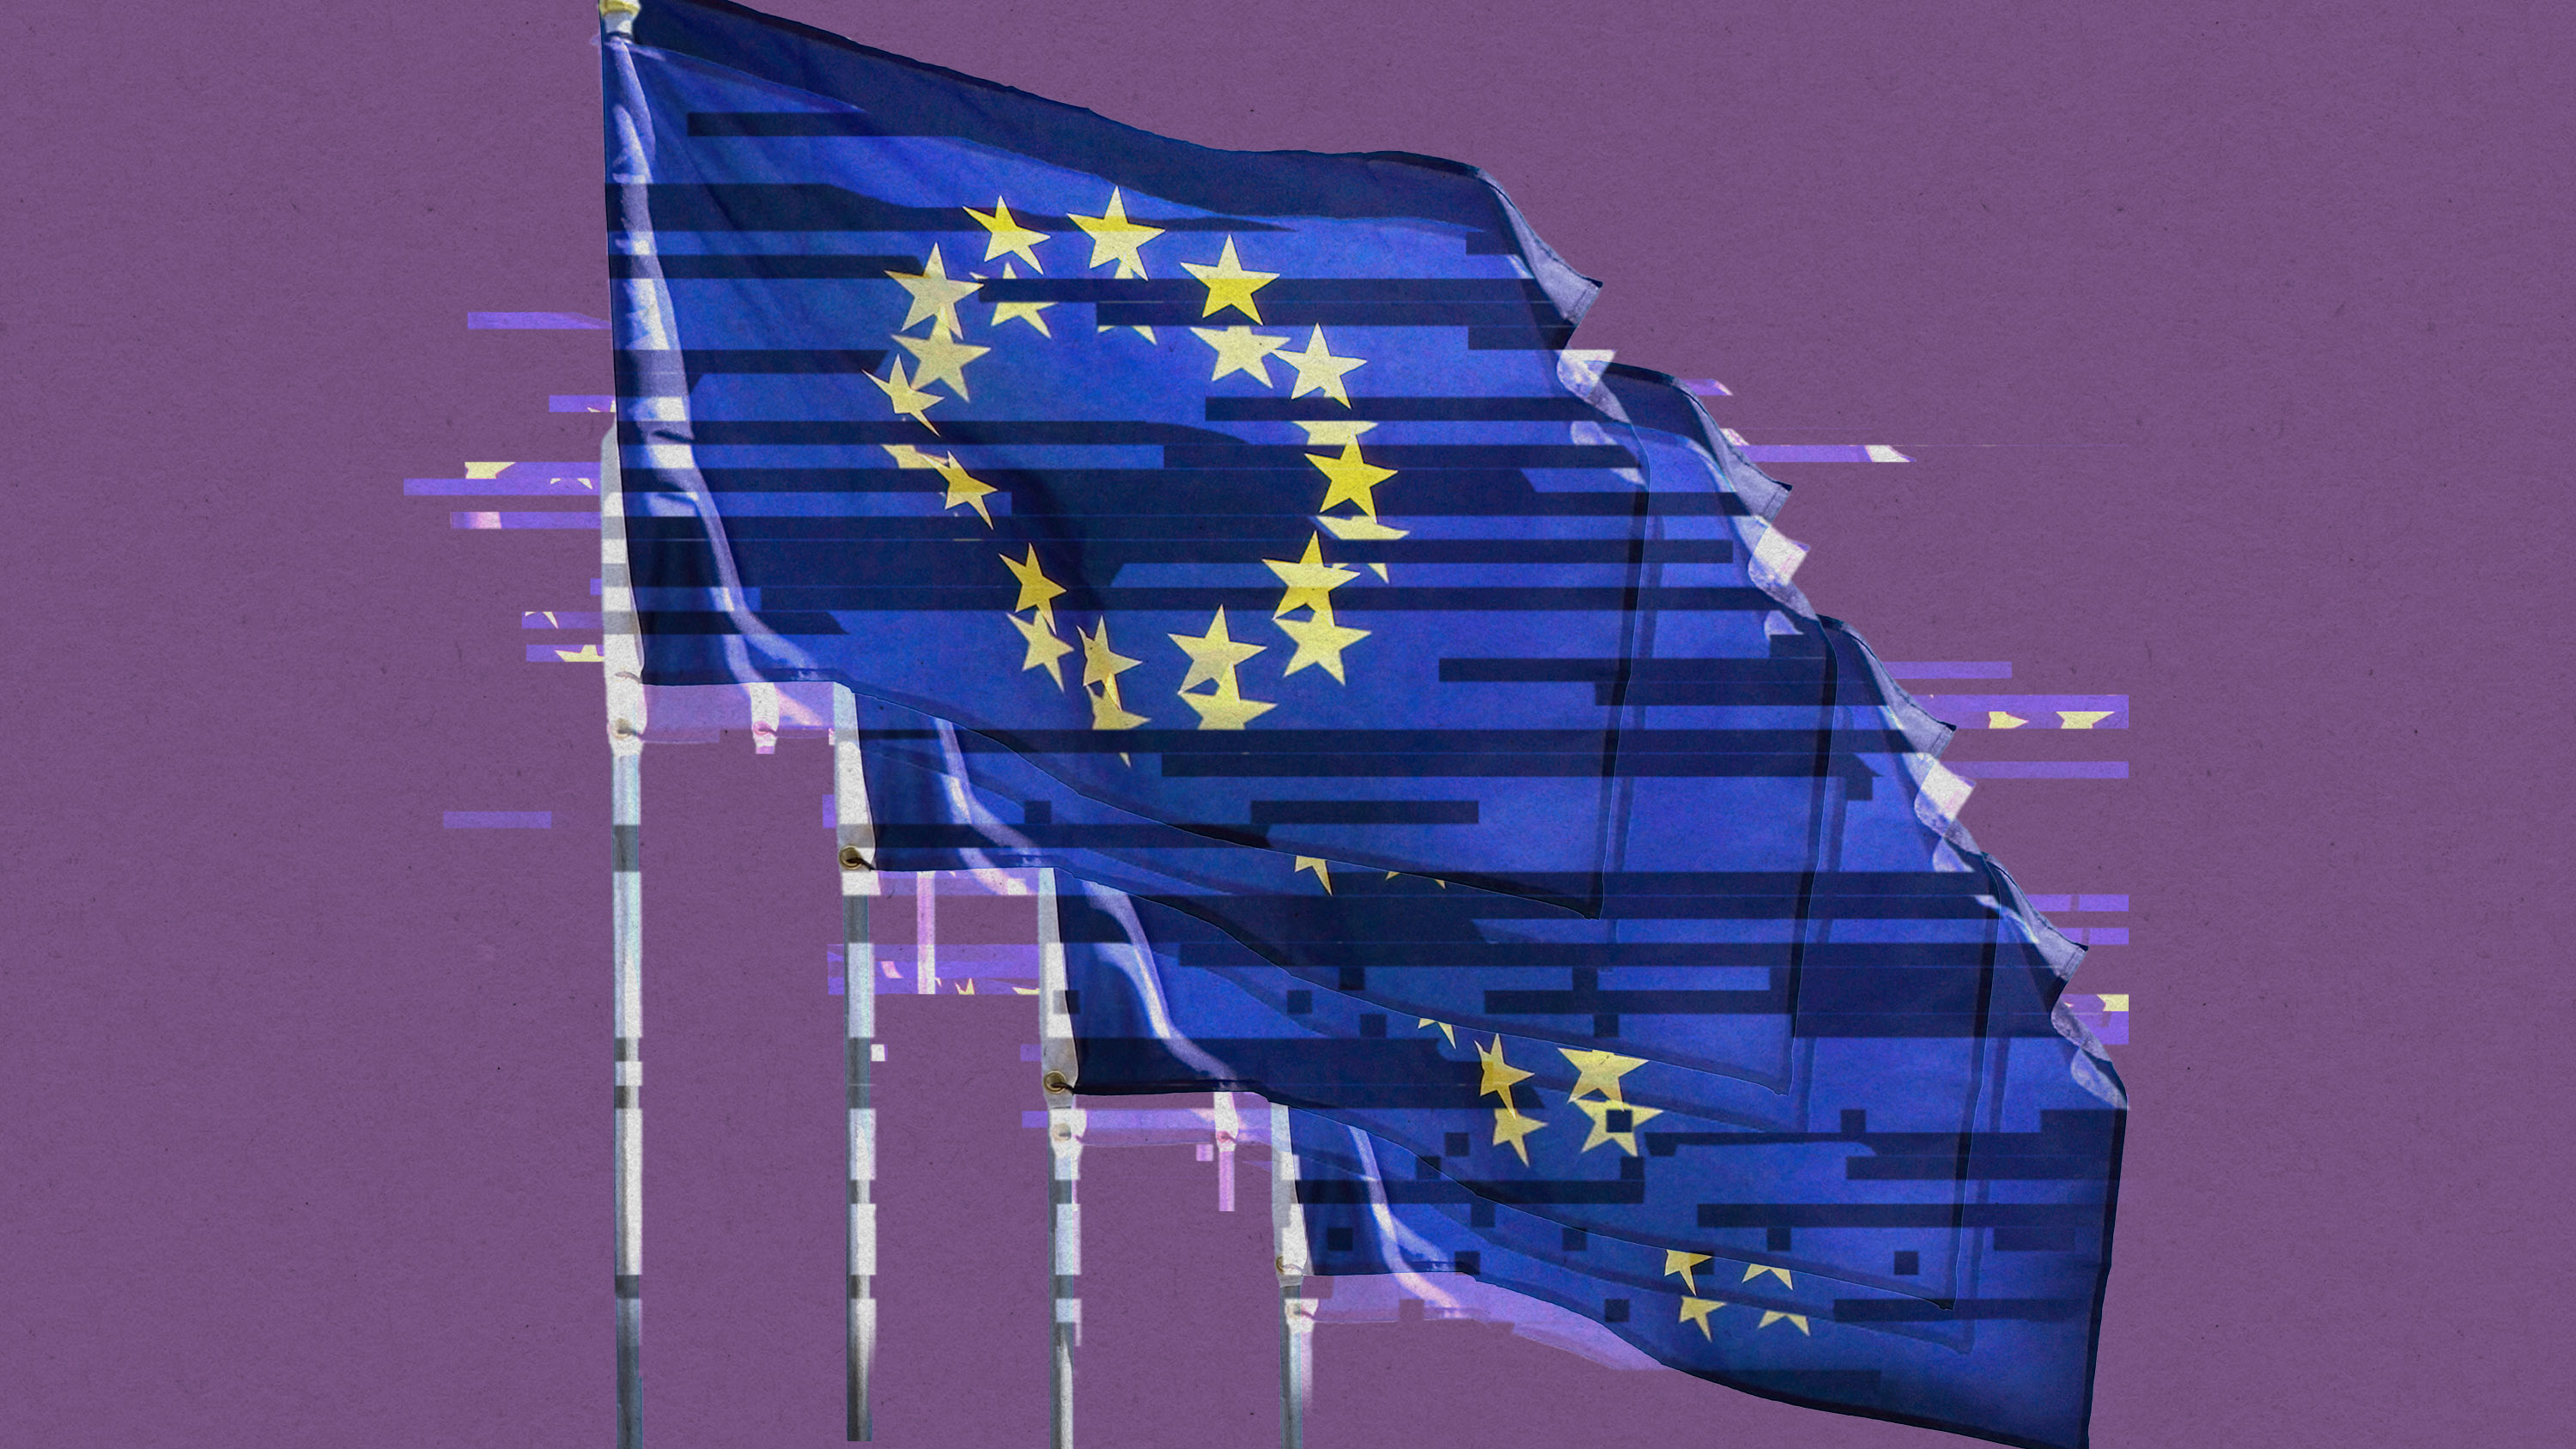 glitched row of four waving European Union flags